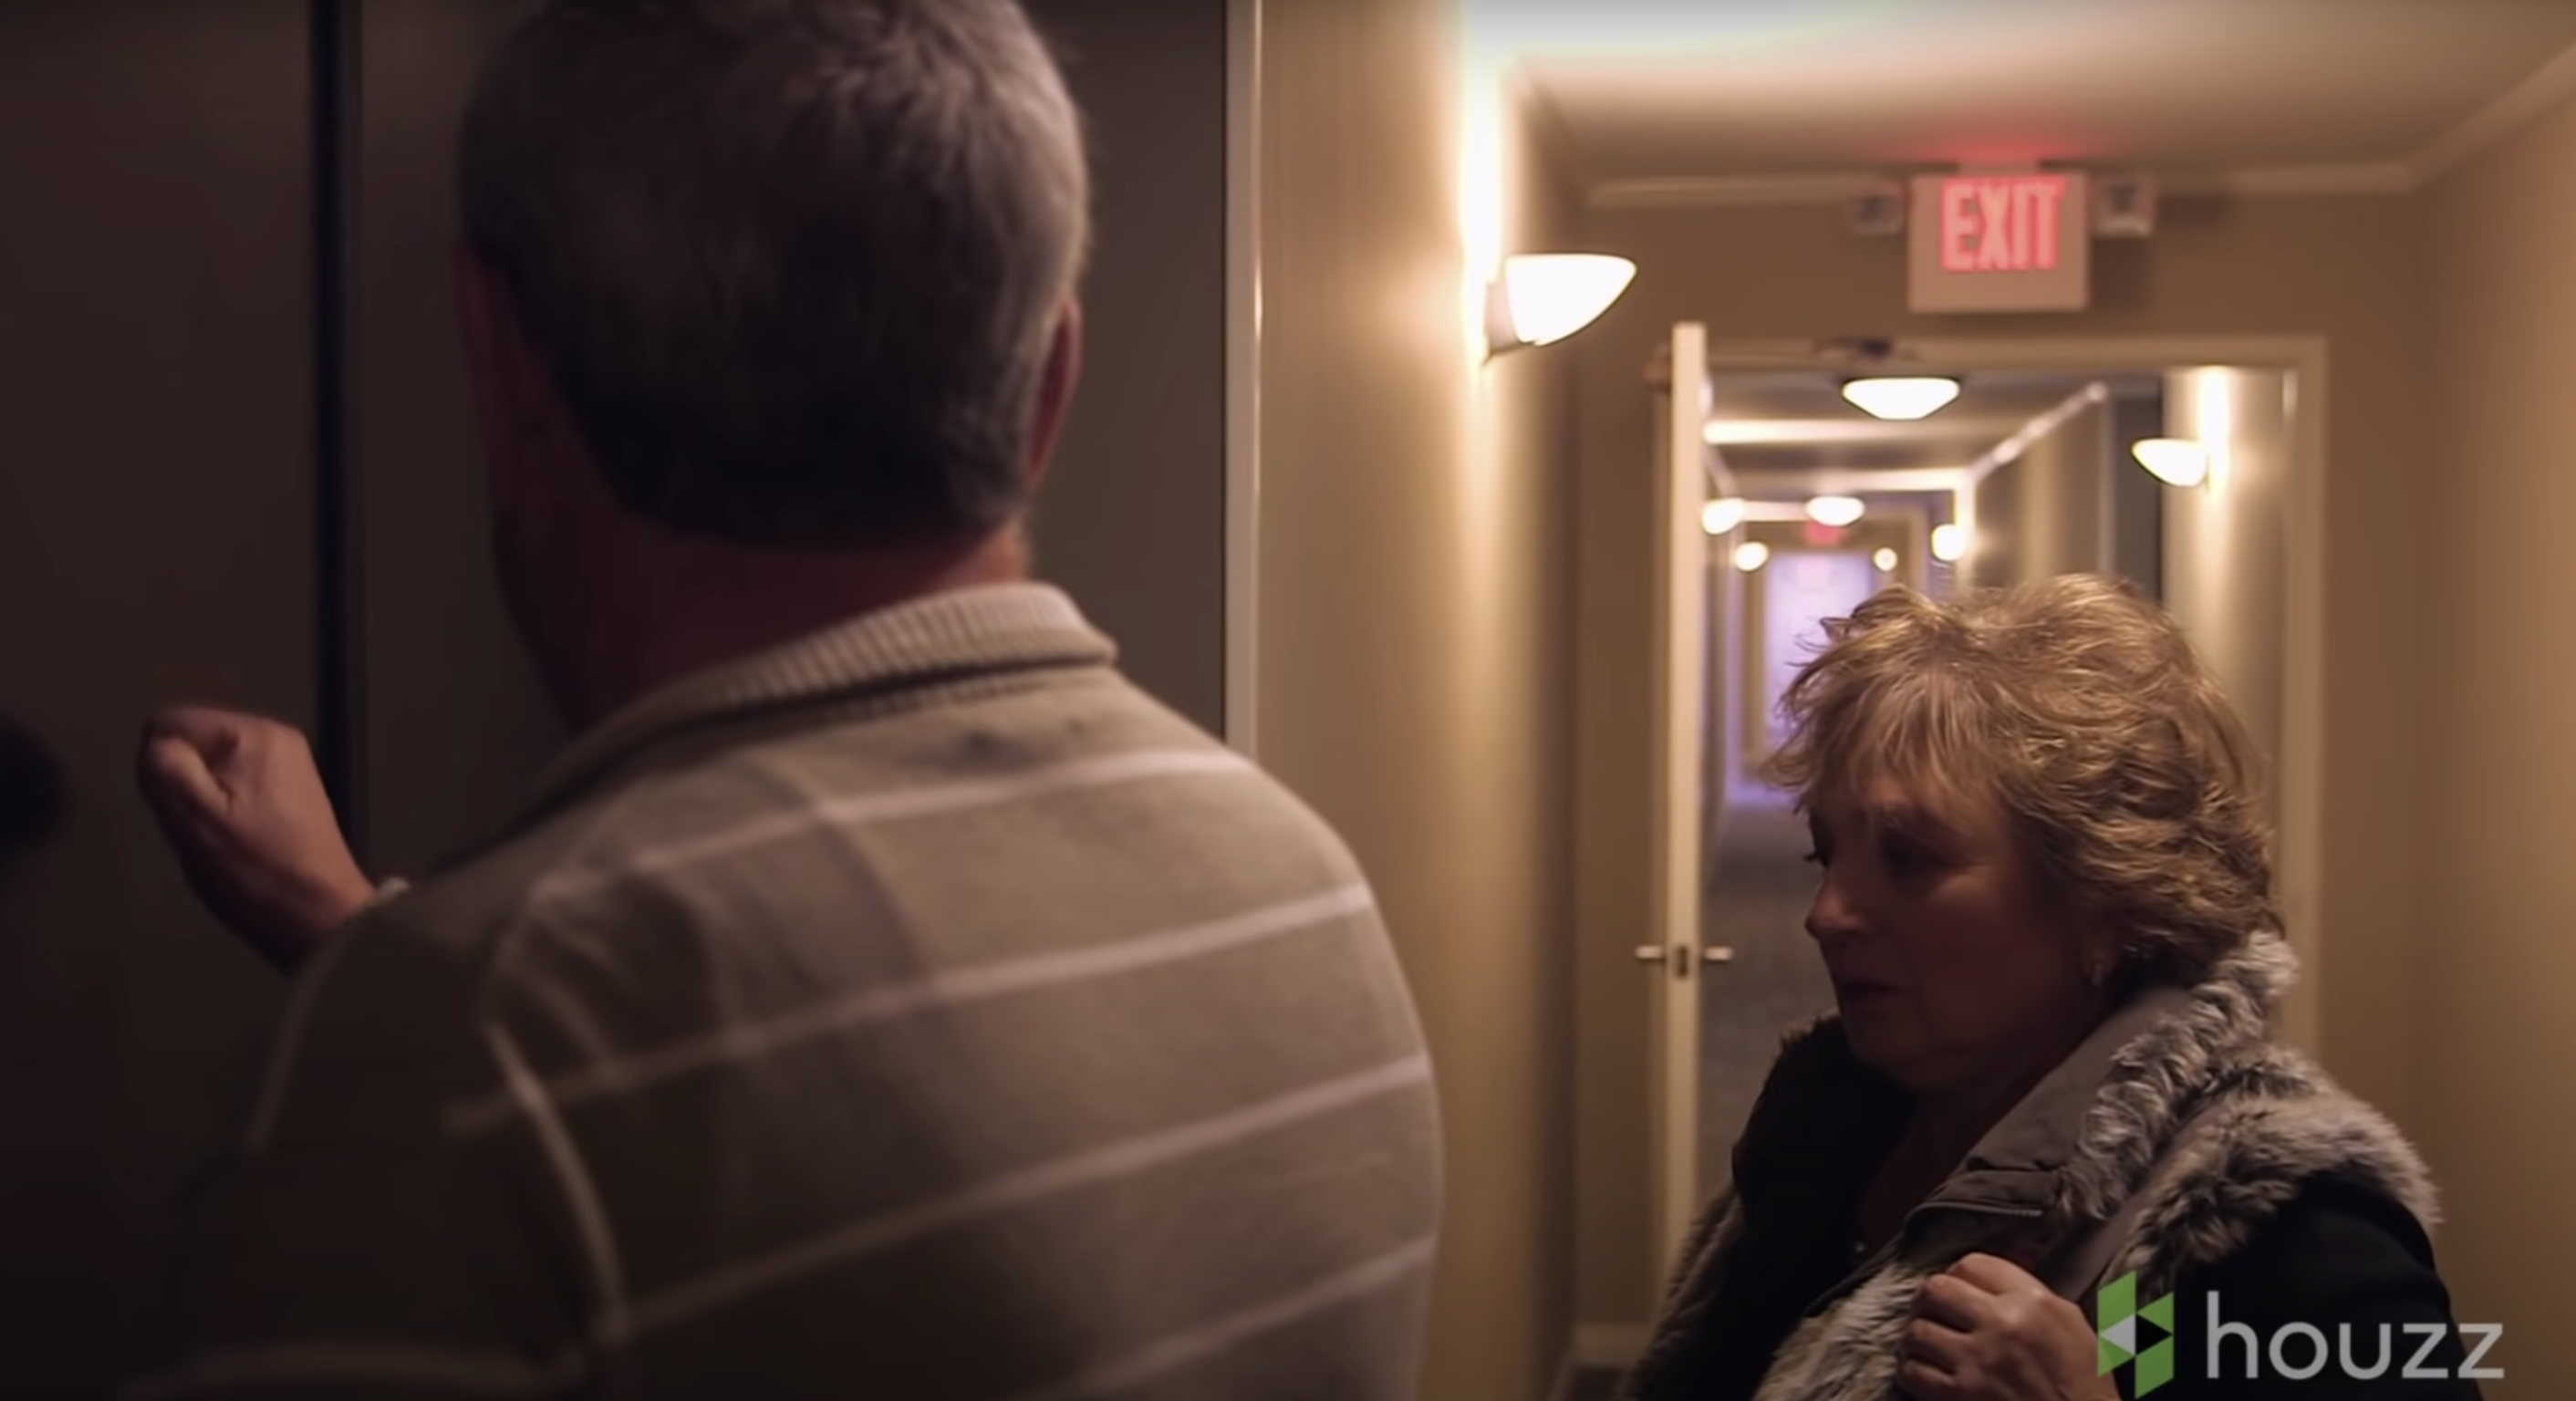 Mark and Elvira Kunis are pictured outside their condo's entrance door | Source: Youtube.com/HouzzTV